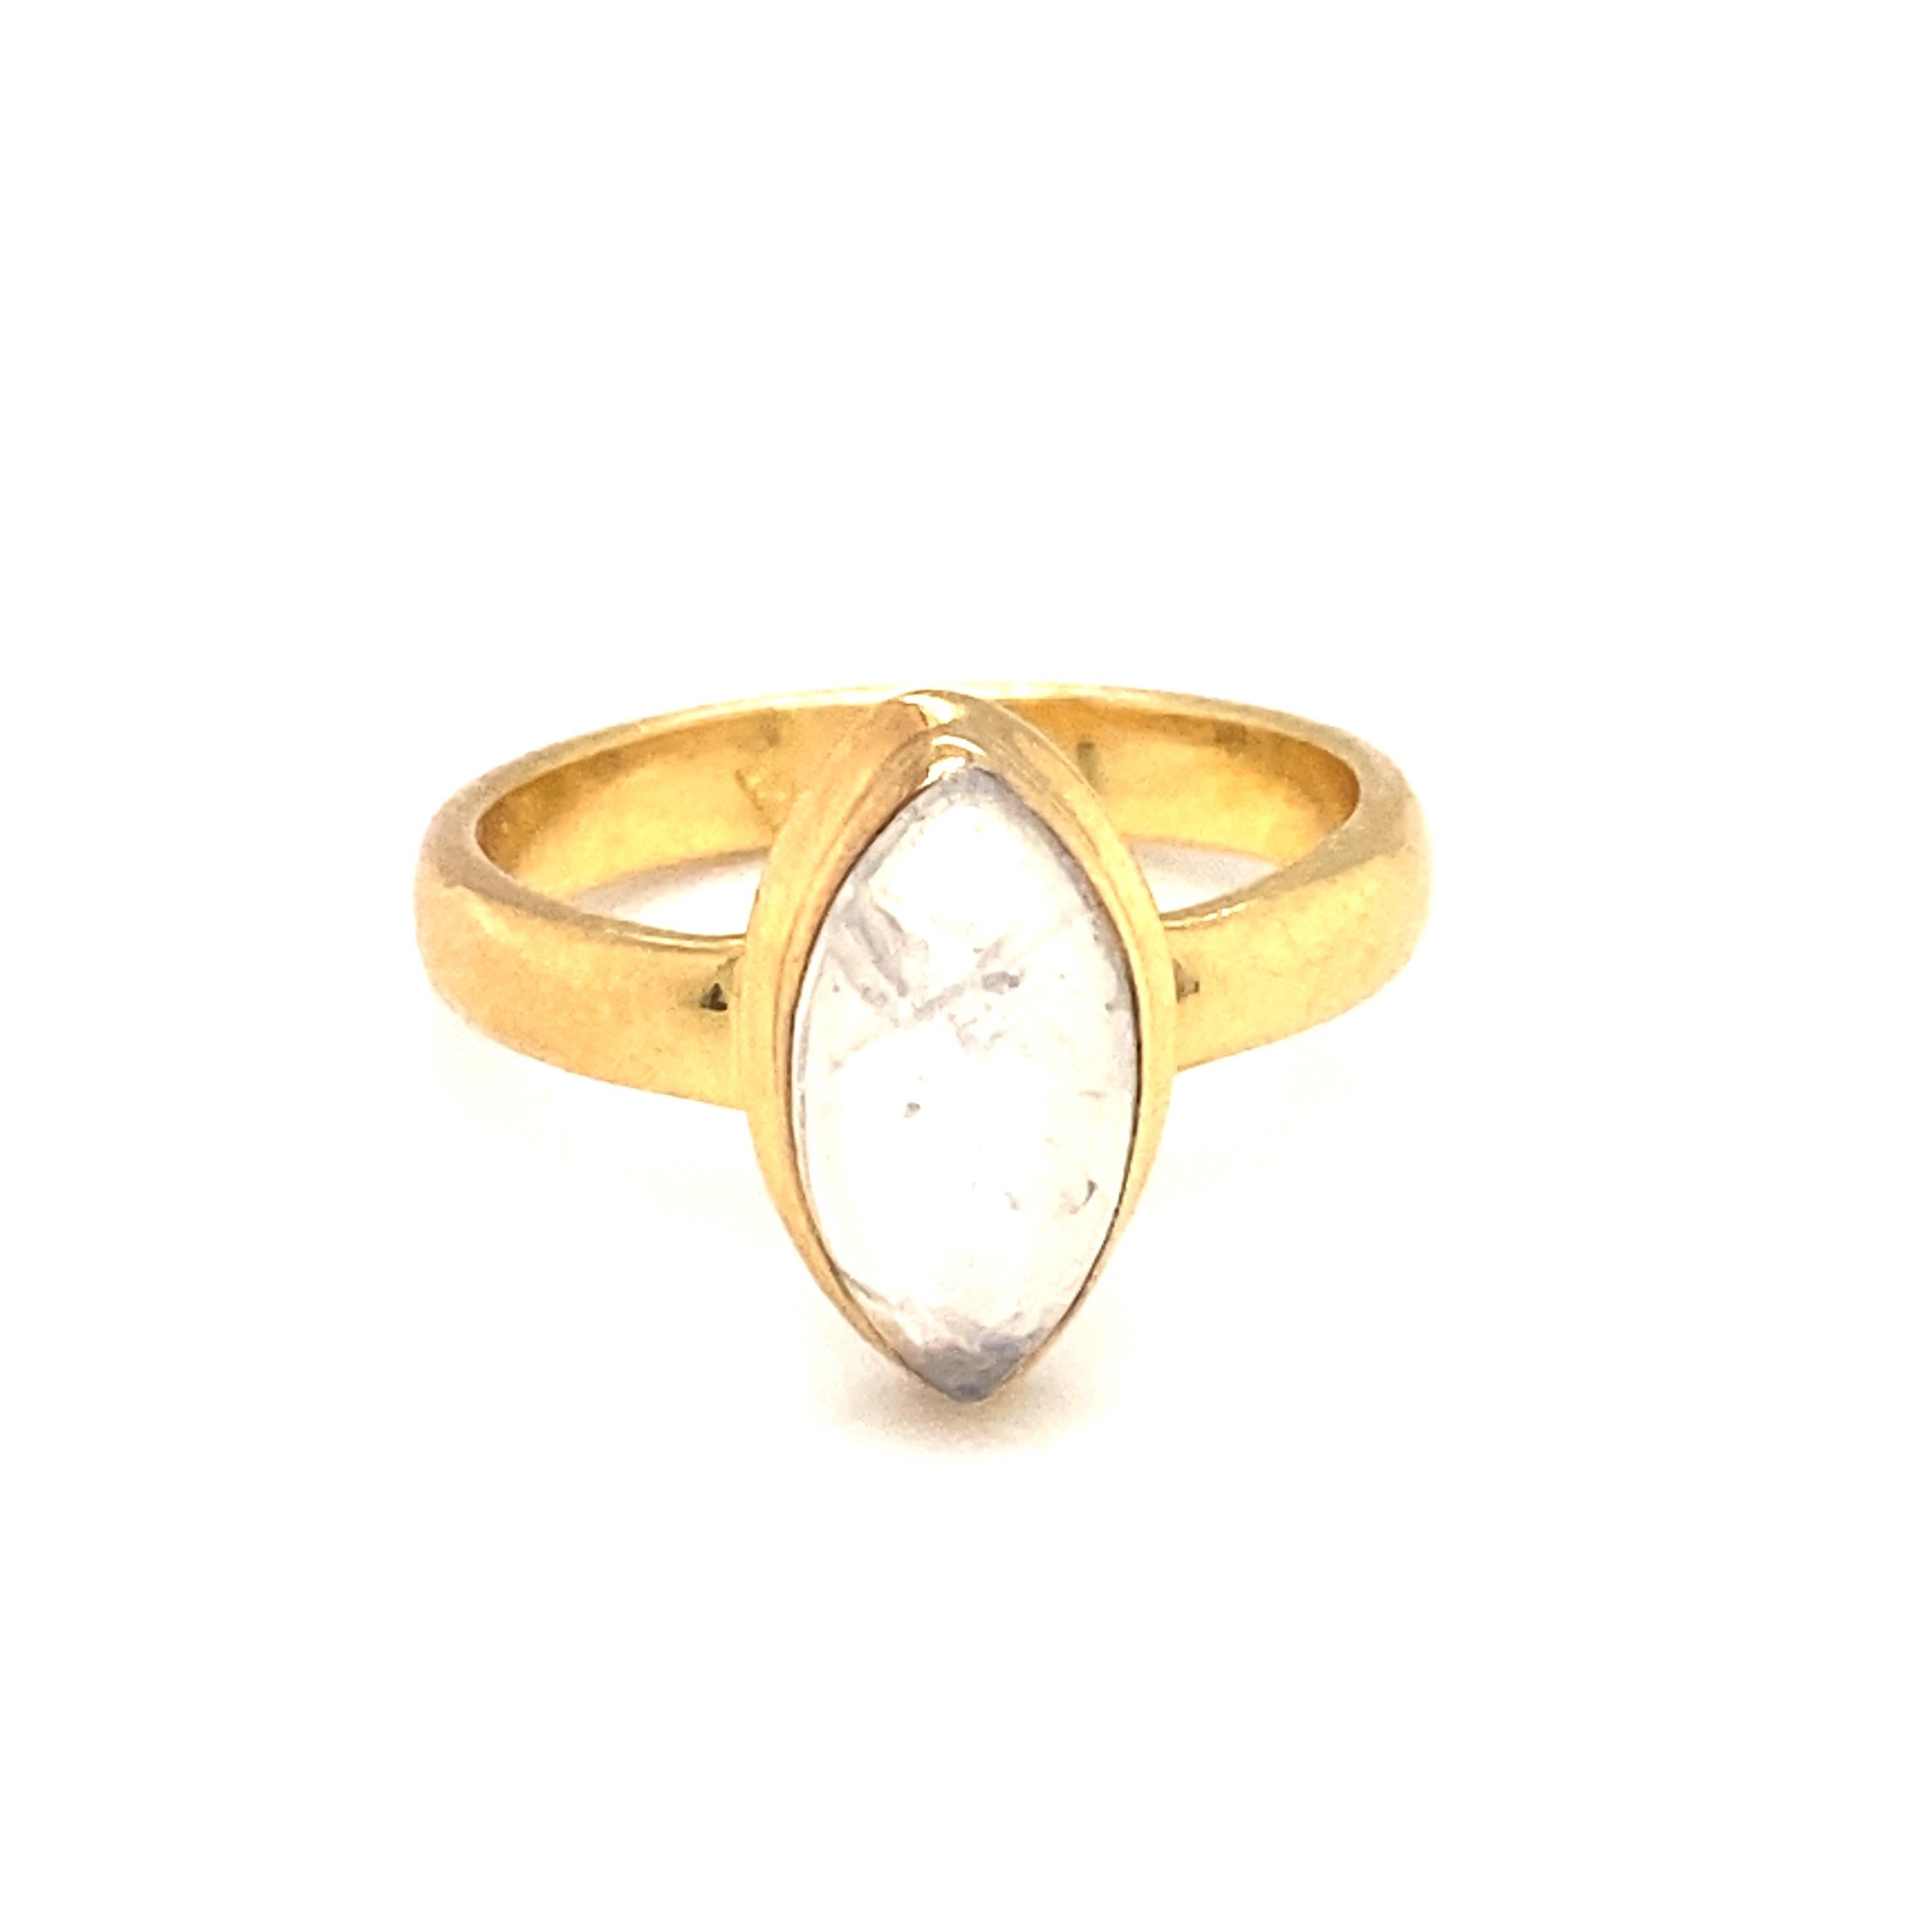 
Item Details: This dainty ring has a center marquise cabochon labradorite in a gold plated sterling setting.

Circa: 21st Century
Metal Type: Gold plated sterling silver
Weight: 3.2g
Size: US 6
